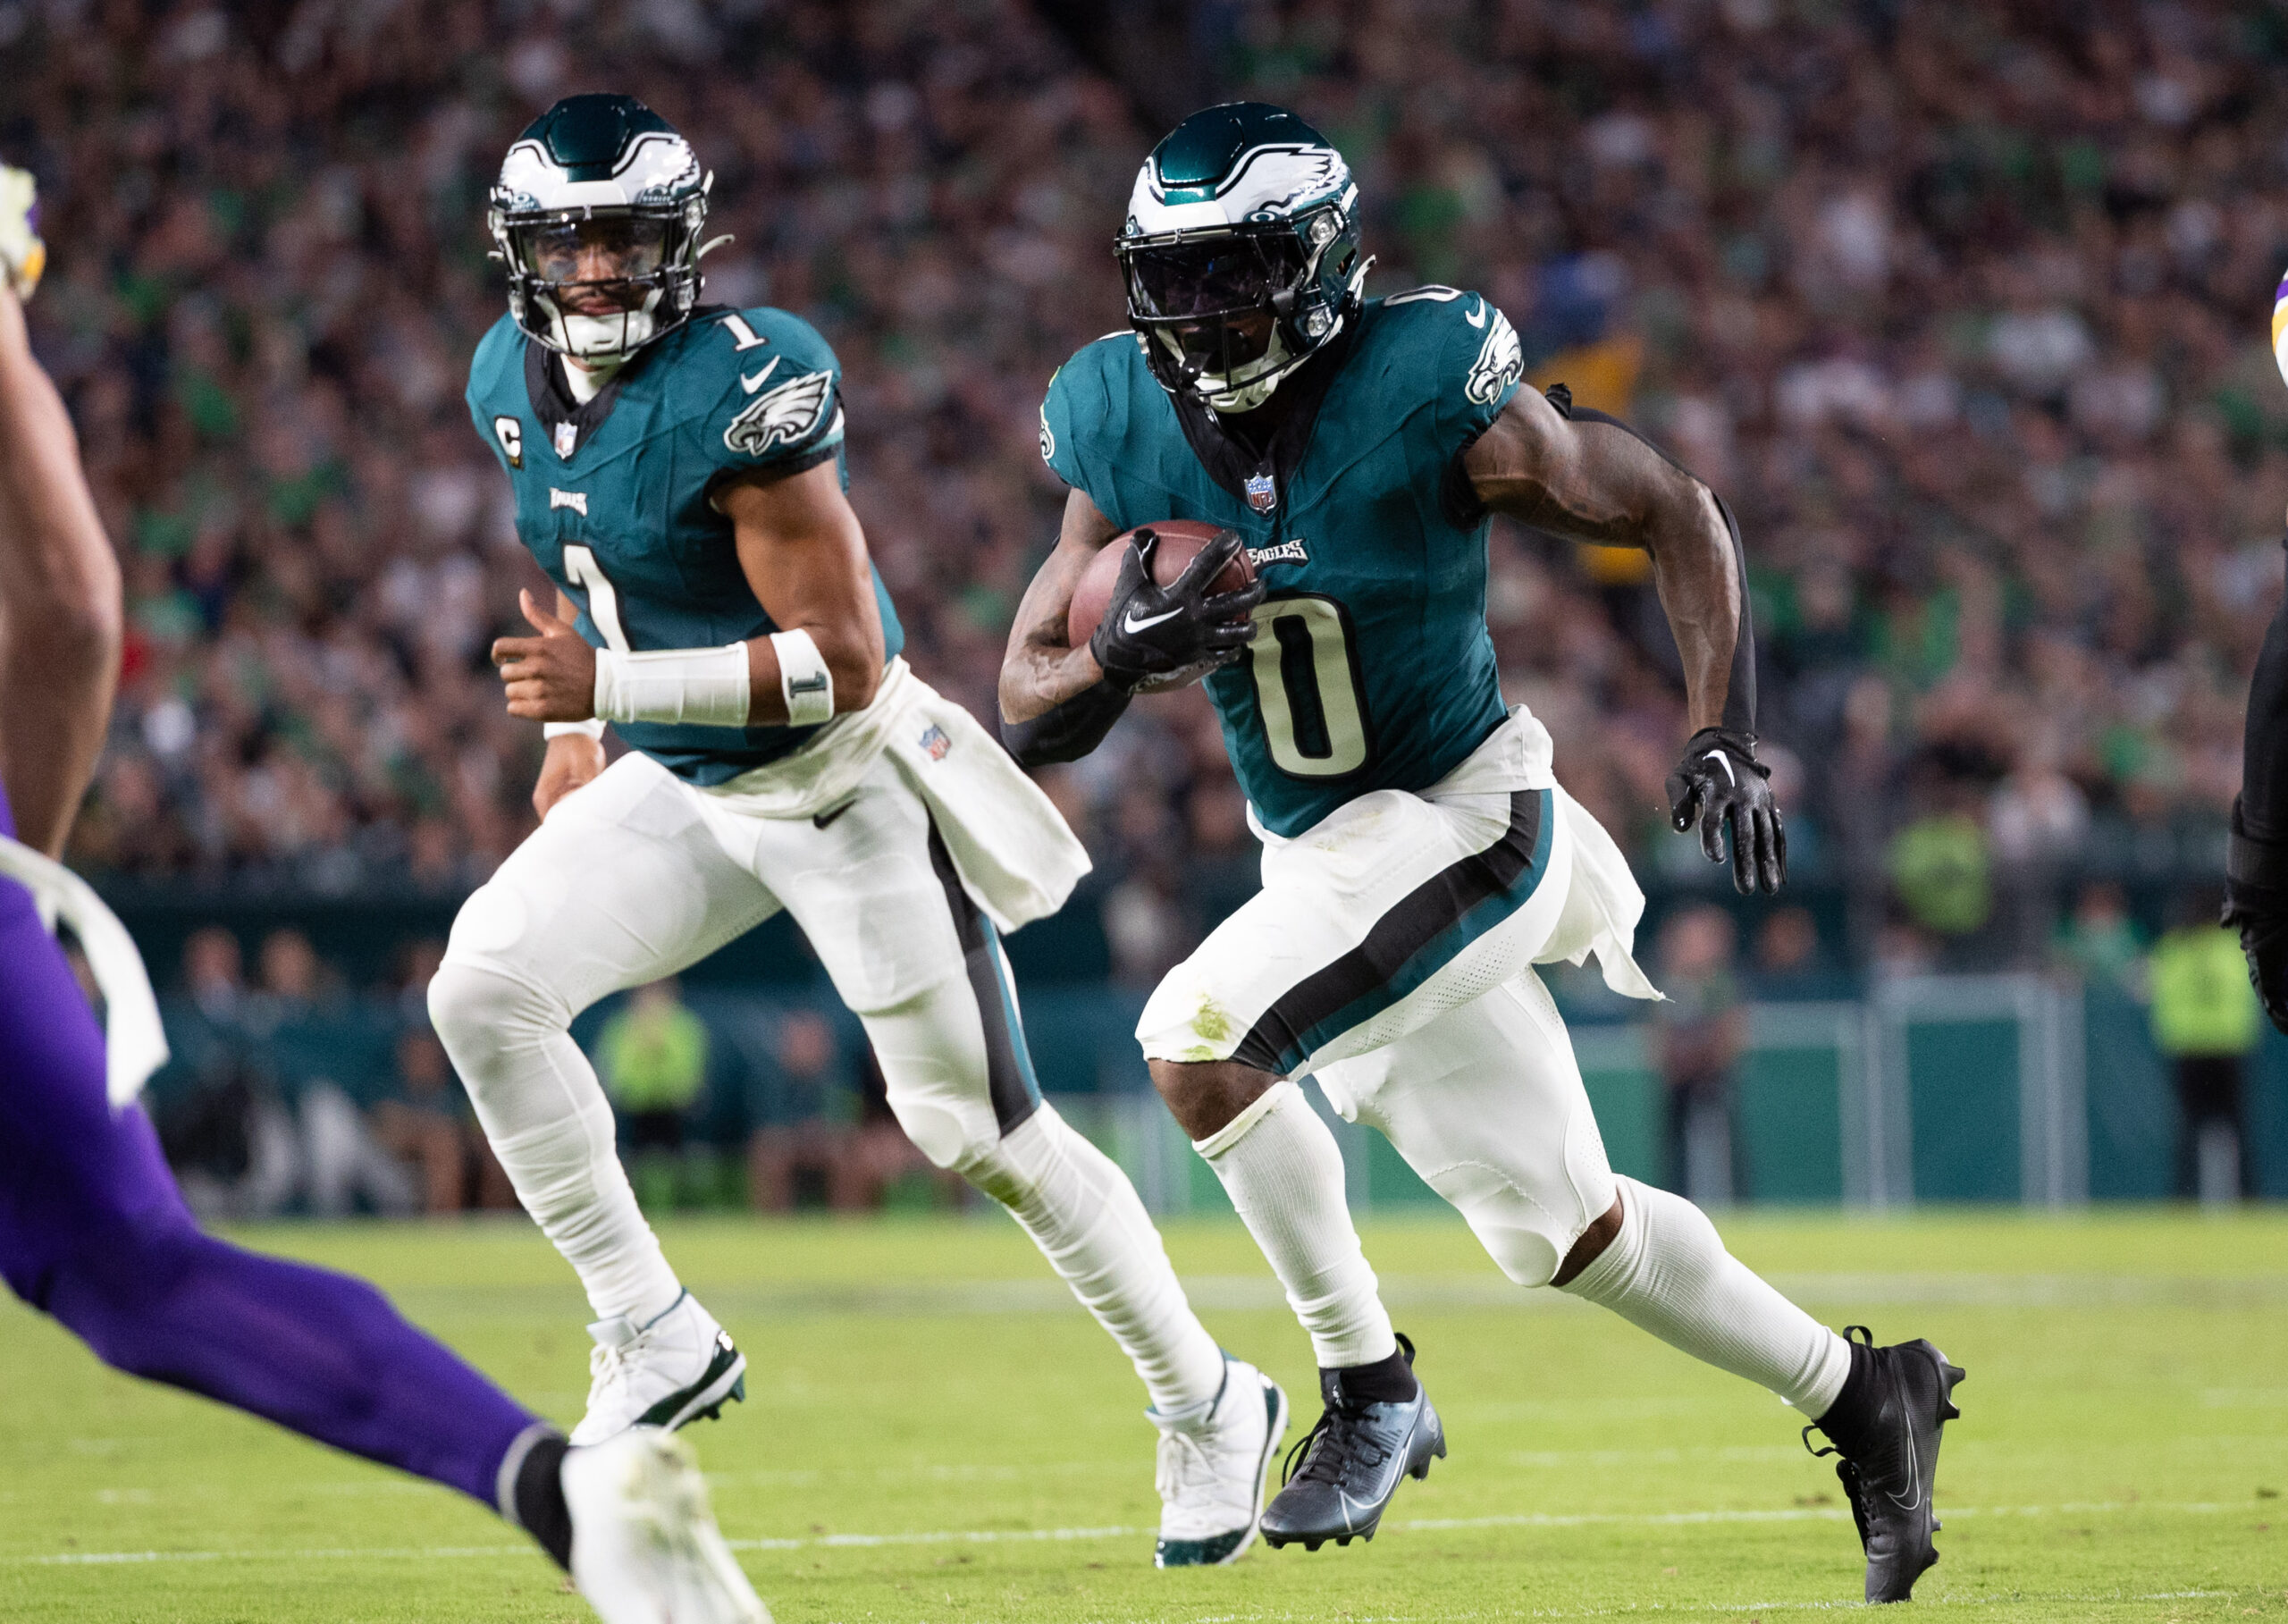 Rating the Philadelphia Eagles Offense out of 10 ✓ Who had the best of